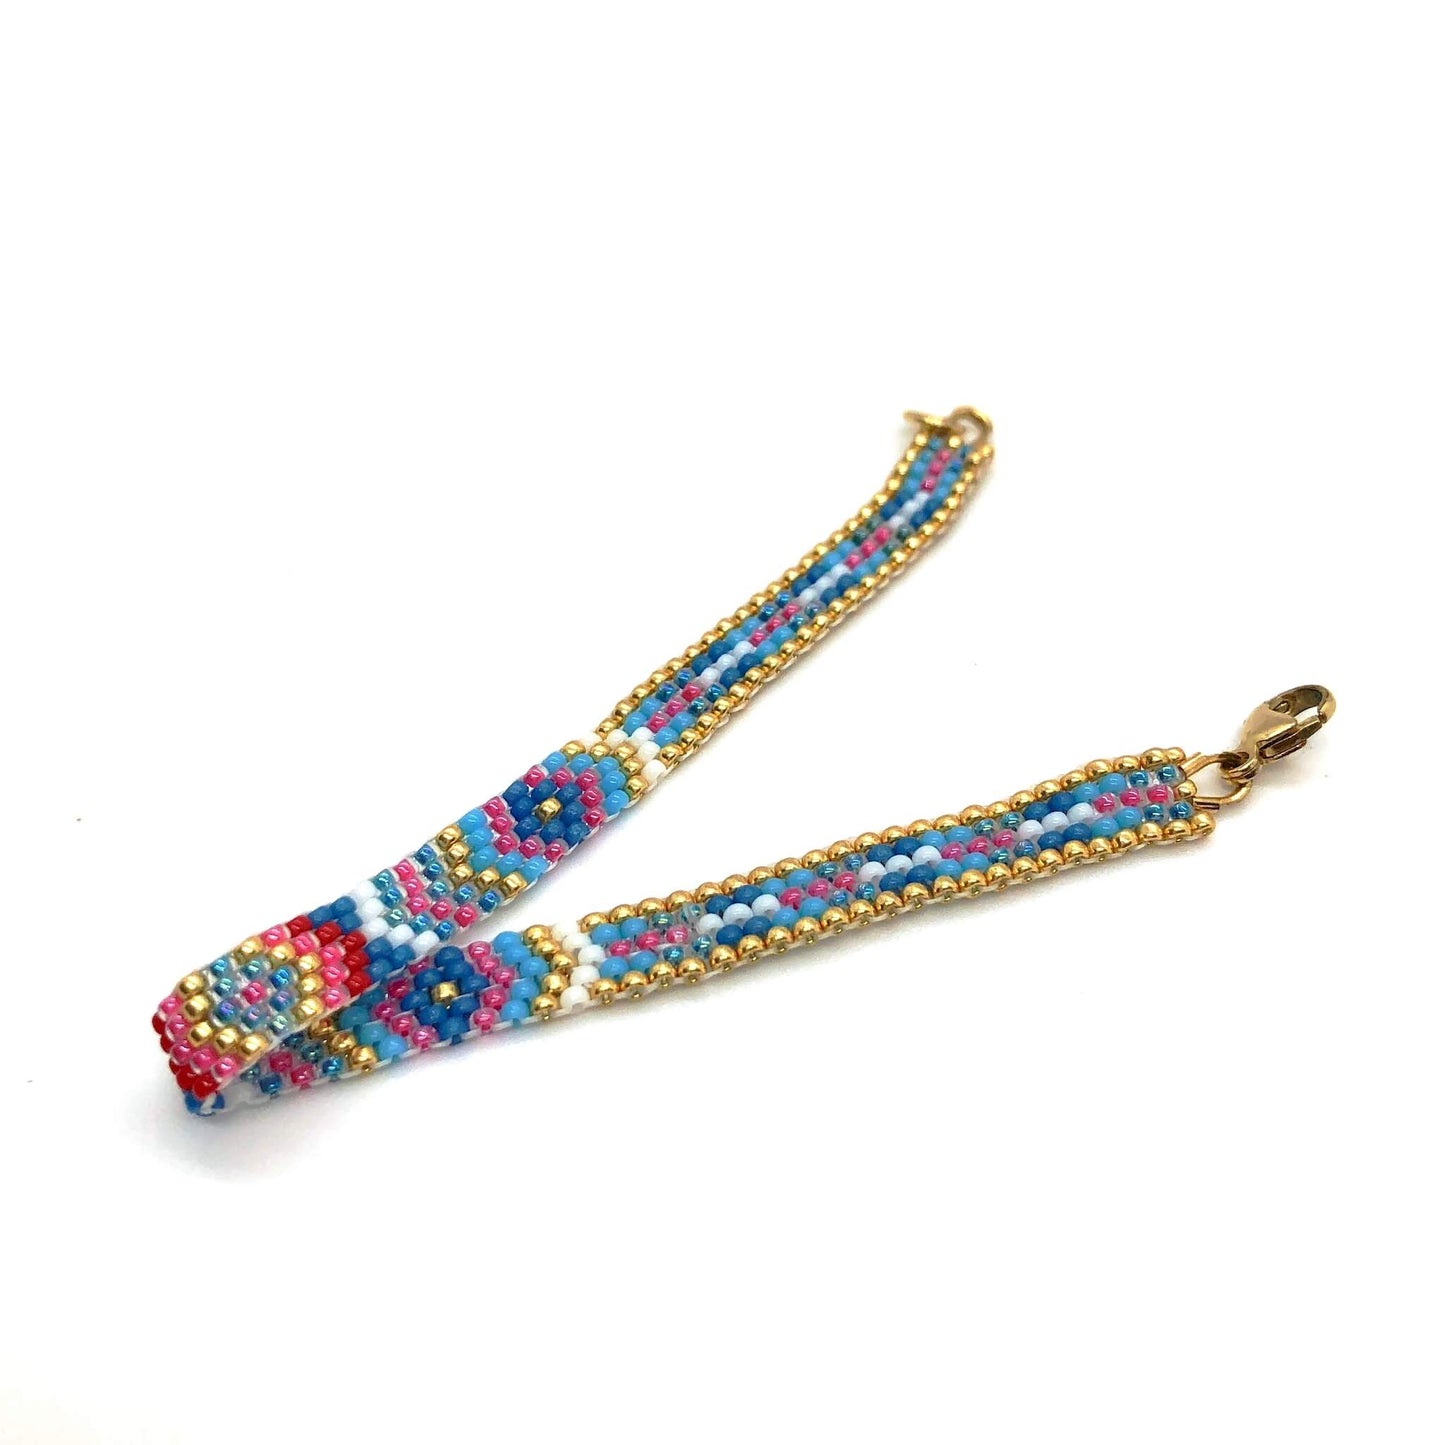 A diamond burst patterned peyote stitch flat beaded bracelet with red, pink, blue, and white seed beads and a gold border.